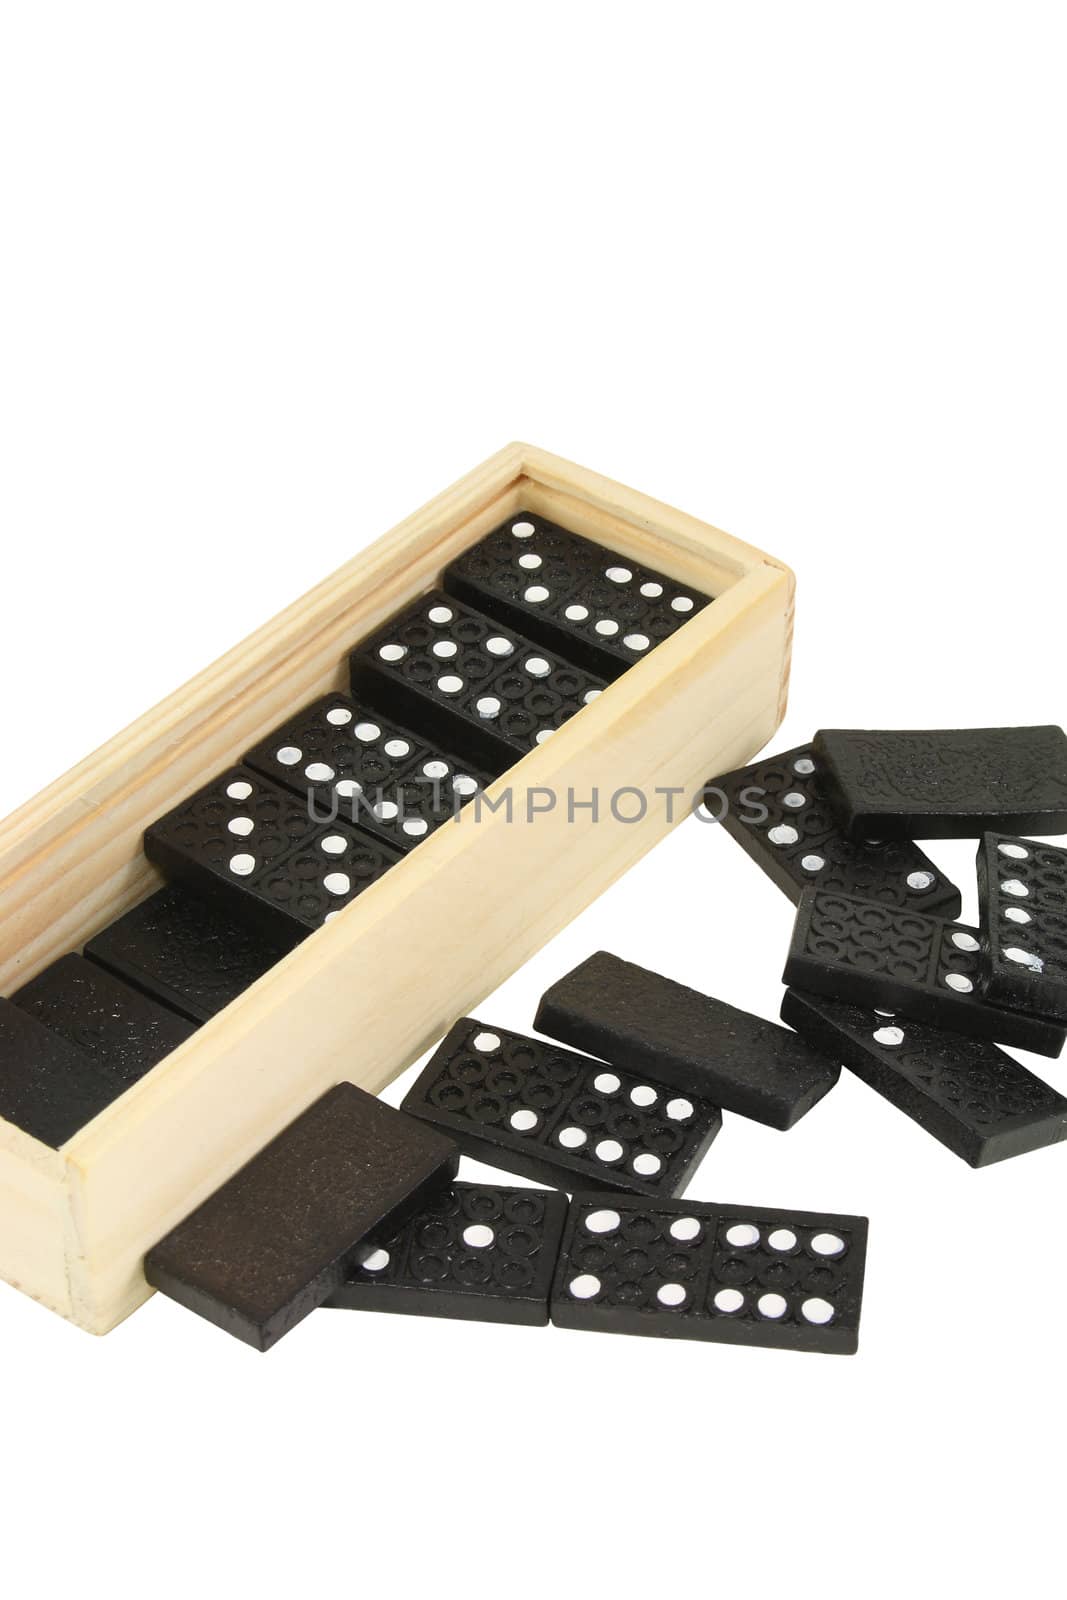 a box of domino tiles and scattered tiles isolated